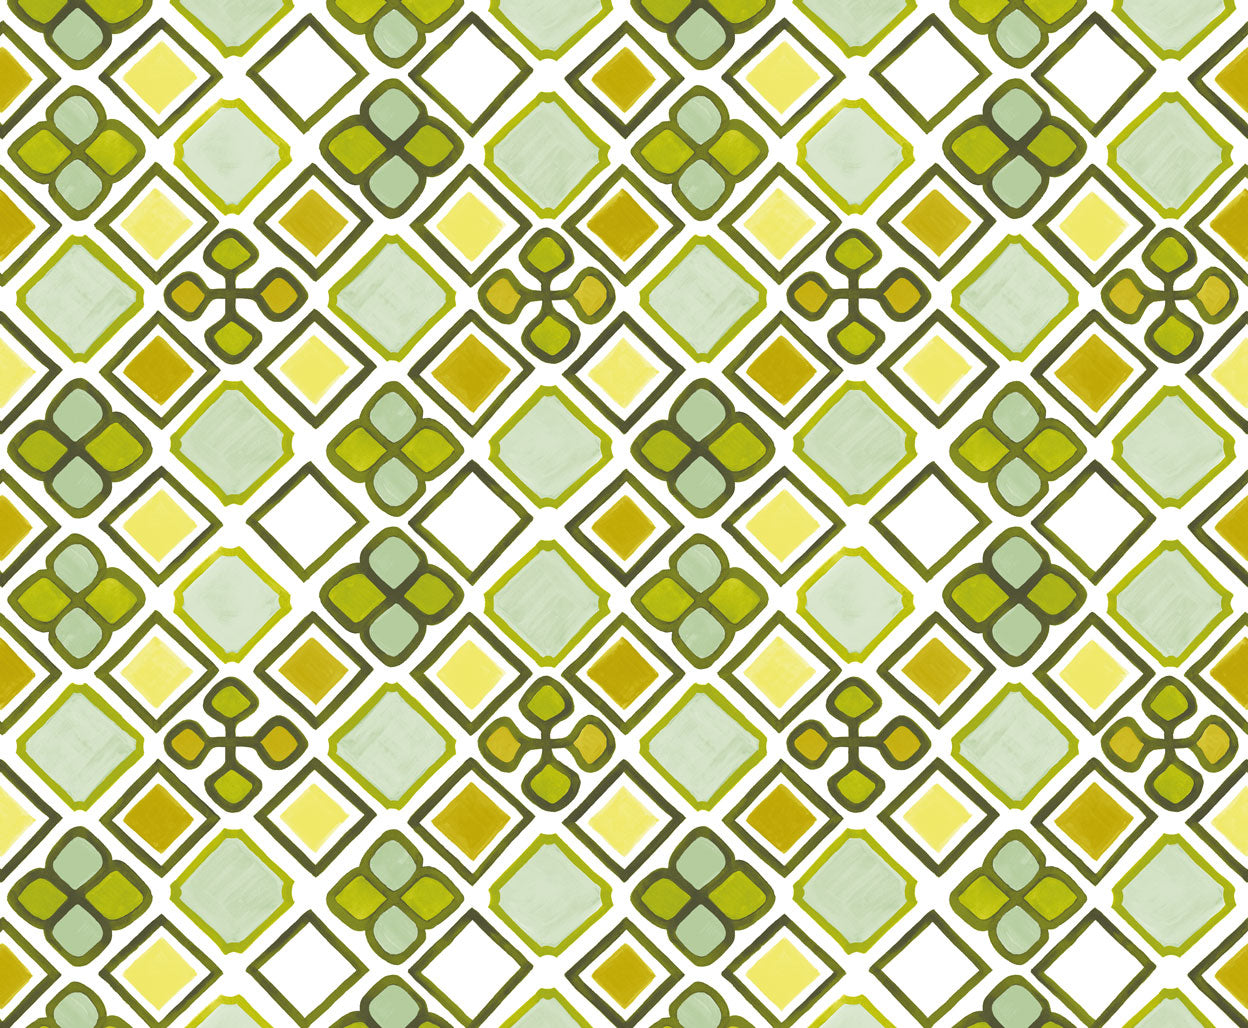 Detail of wallpaper in a geometric diamond and floral print in shades of green, yellow and white.